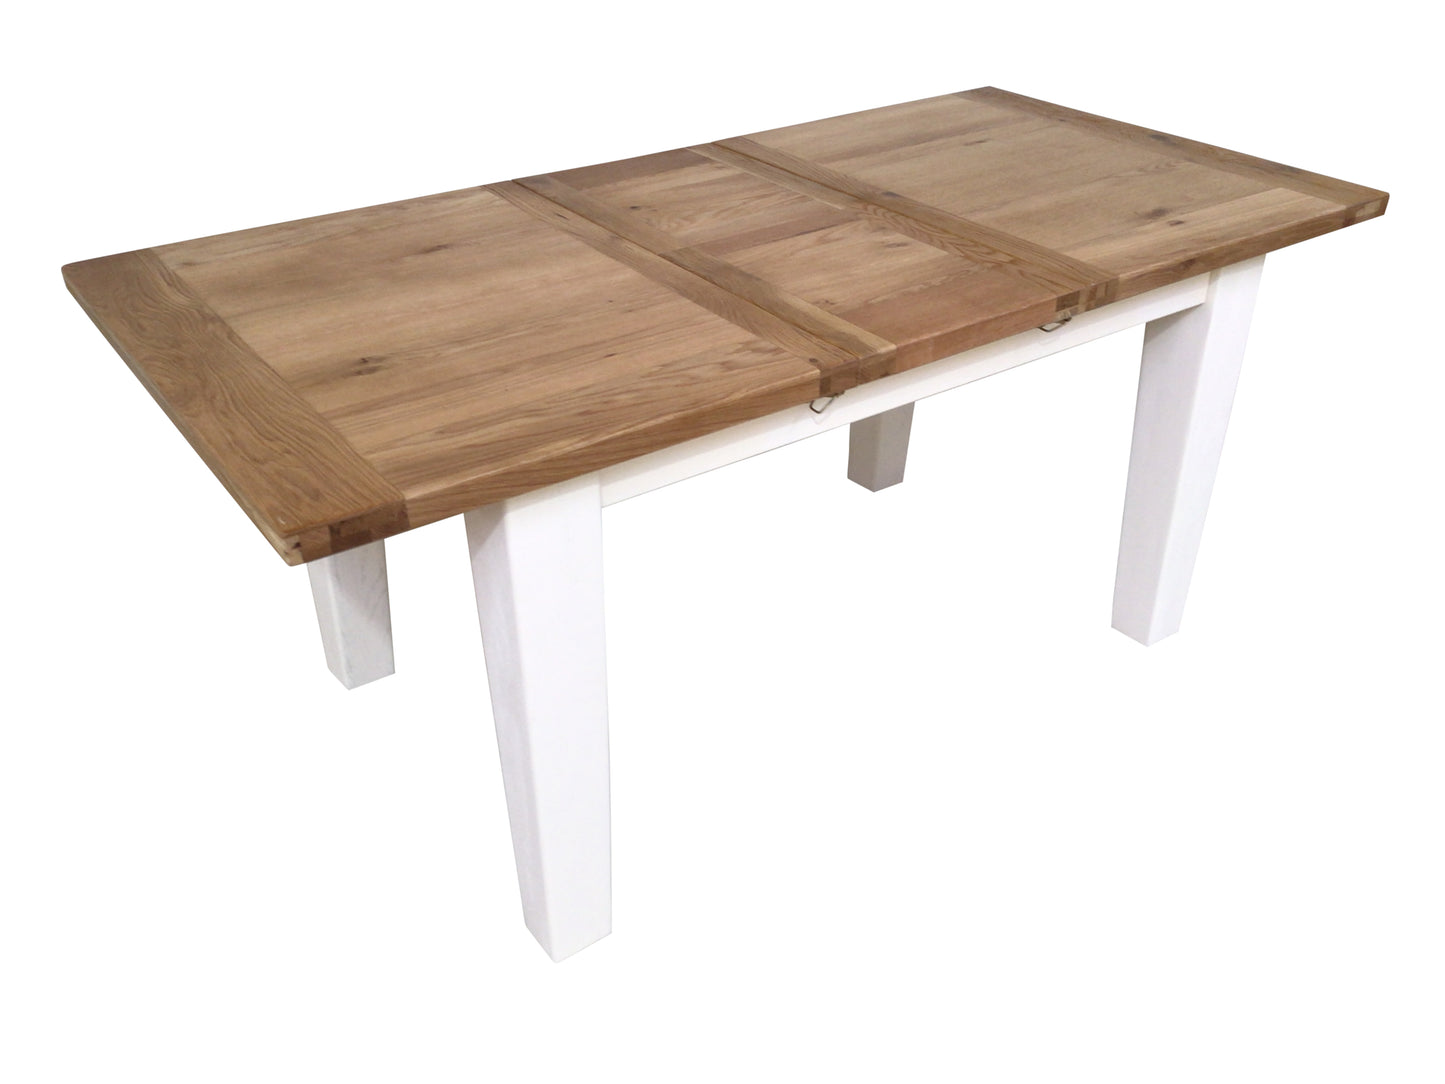 Calgary Oak 1.4m Ext Dining Table painted off-white